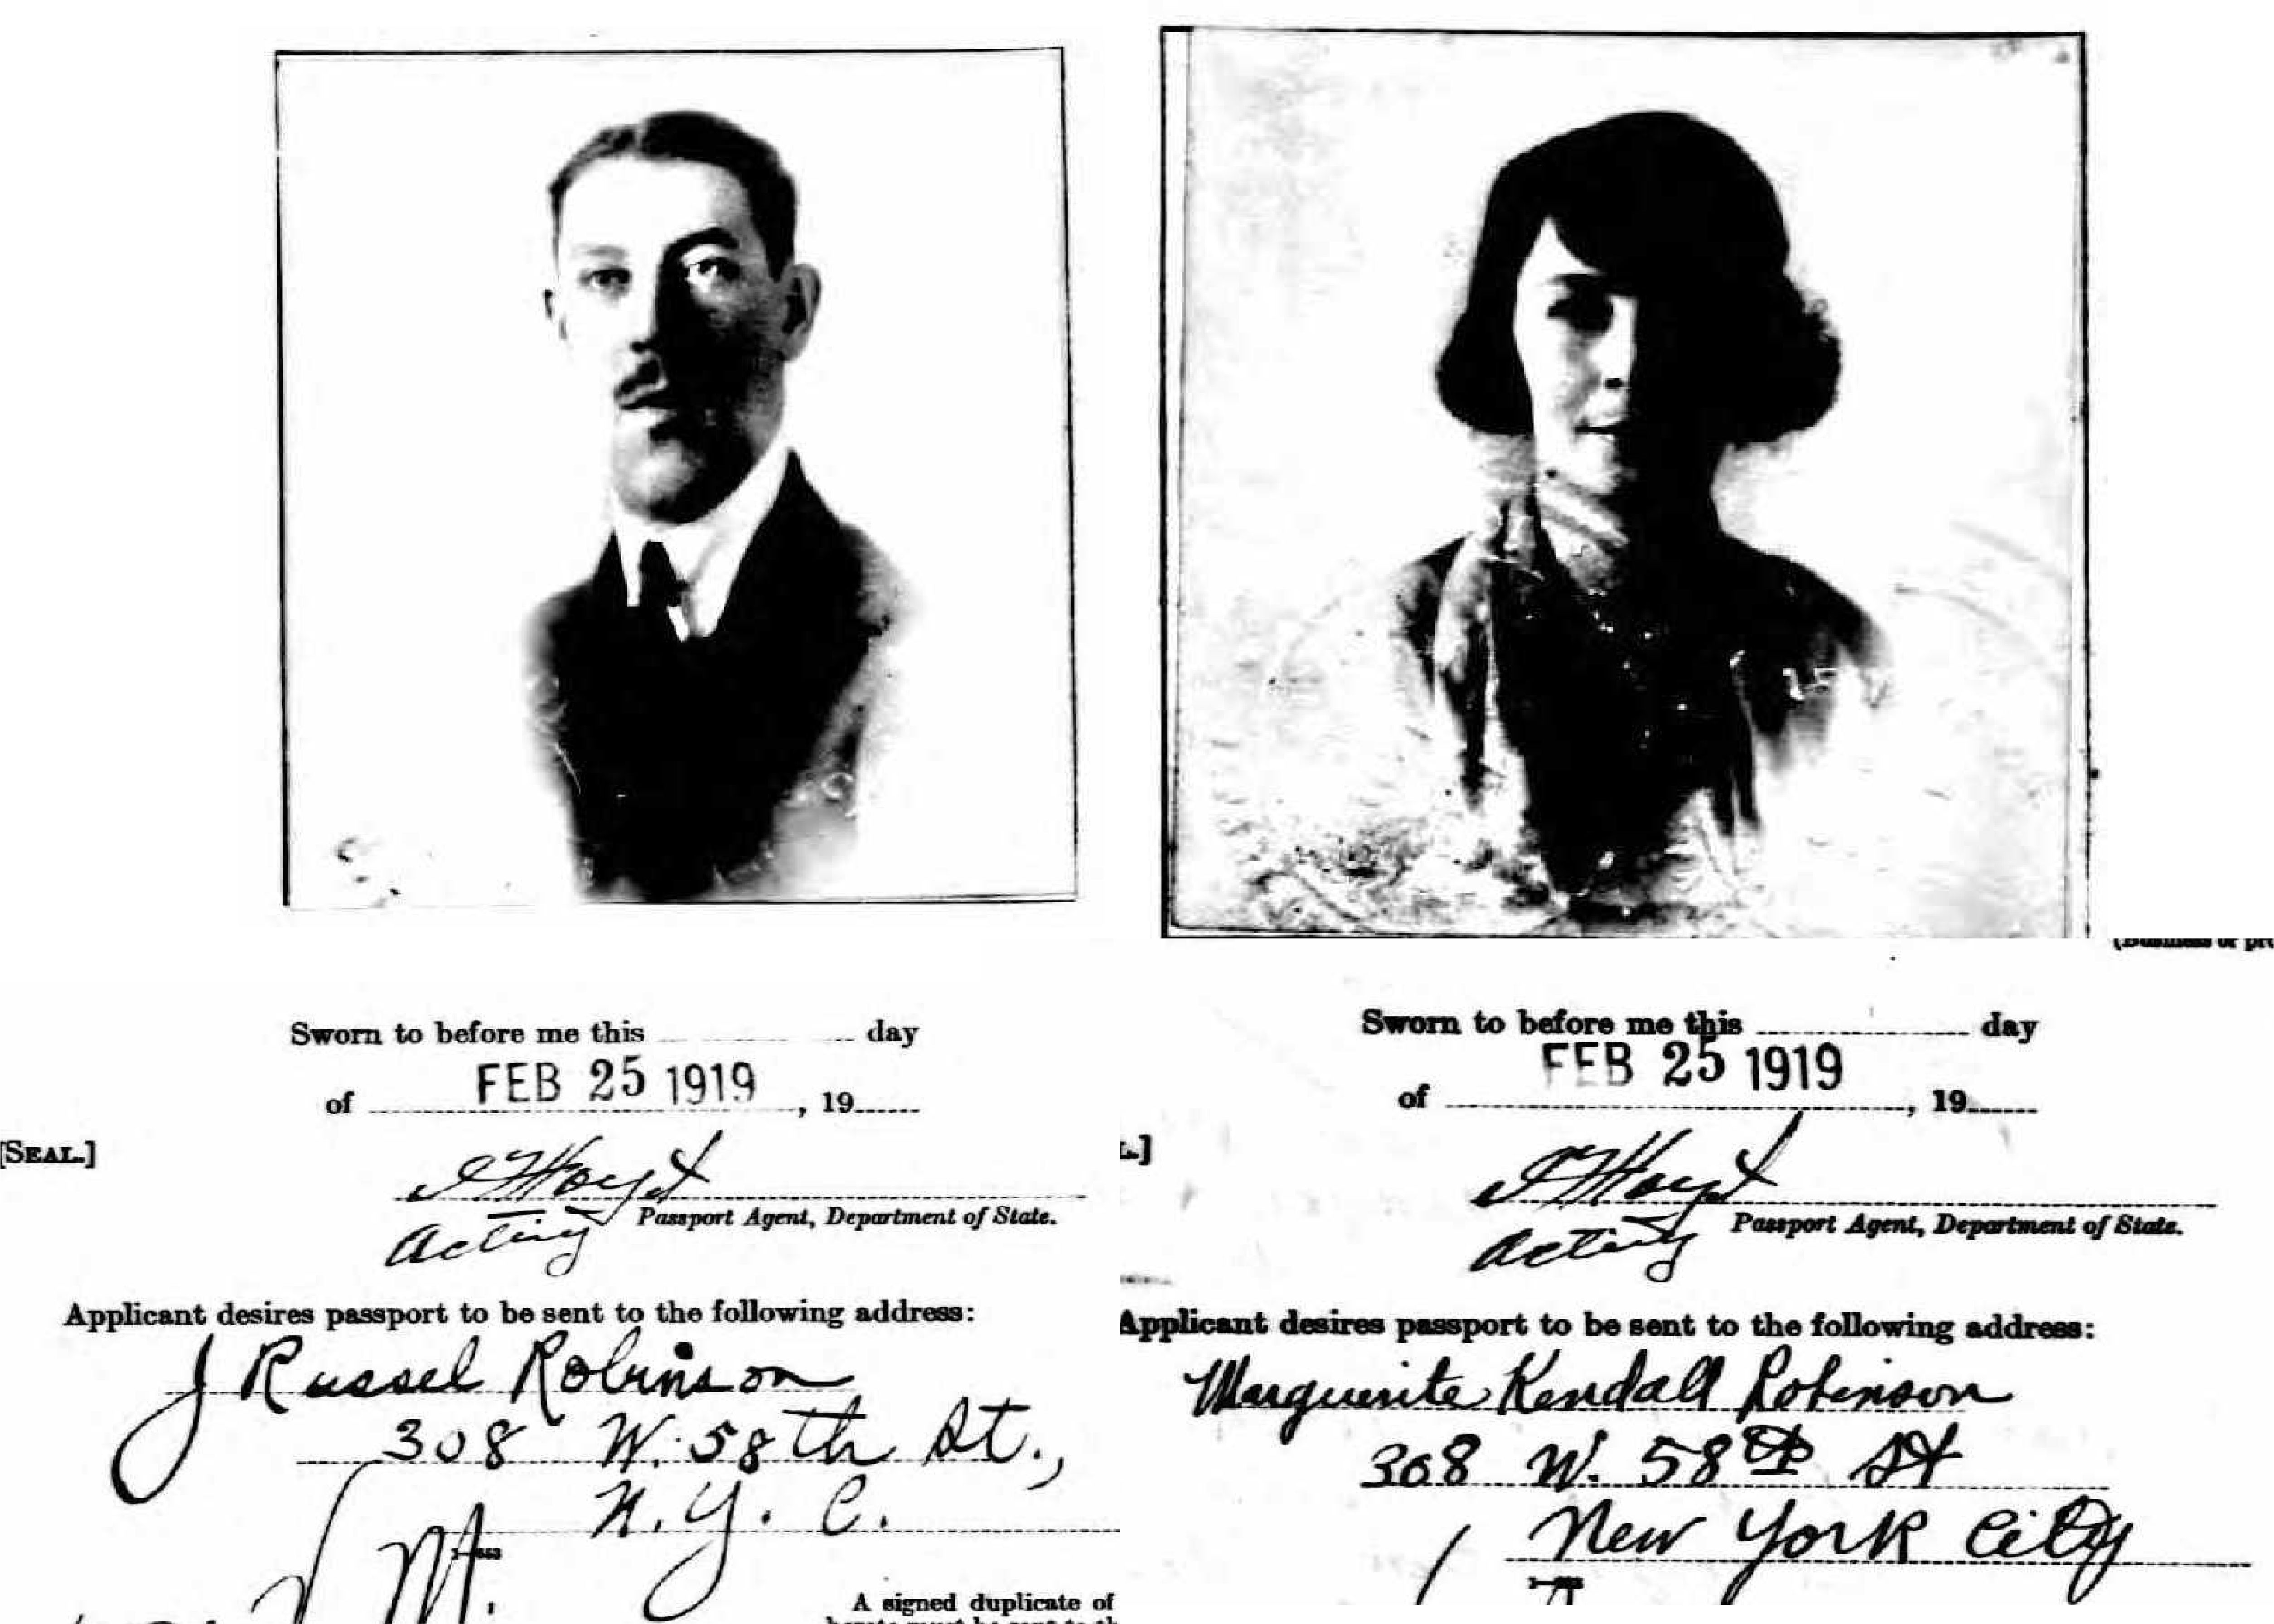 The Robinsons in 1919, from passport application